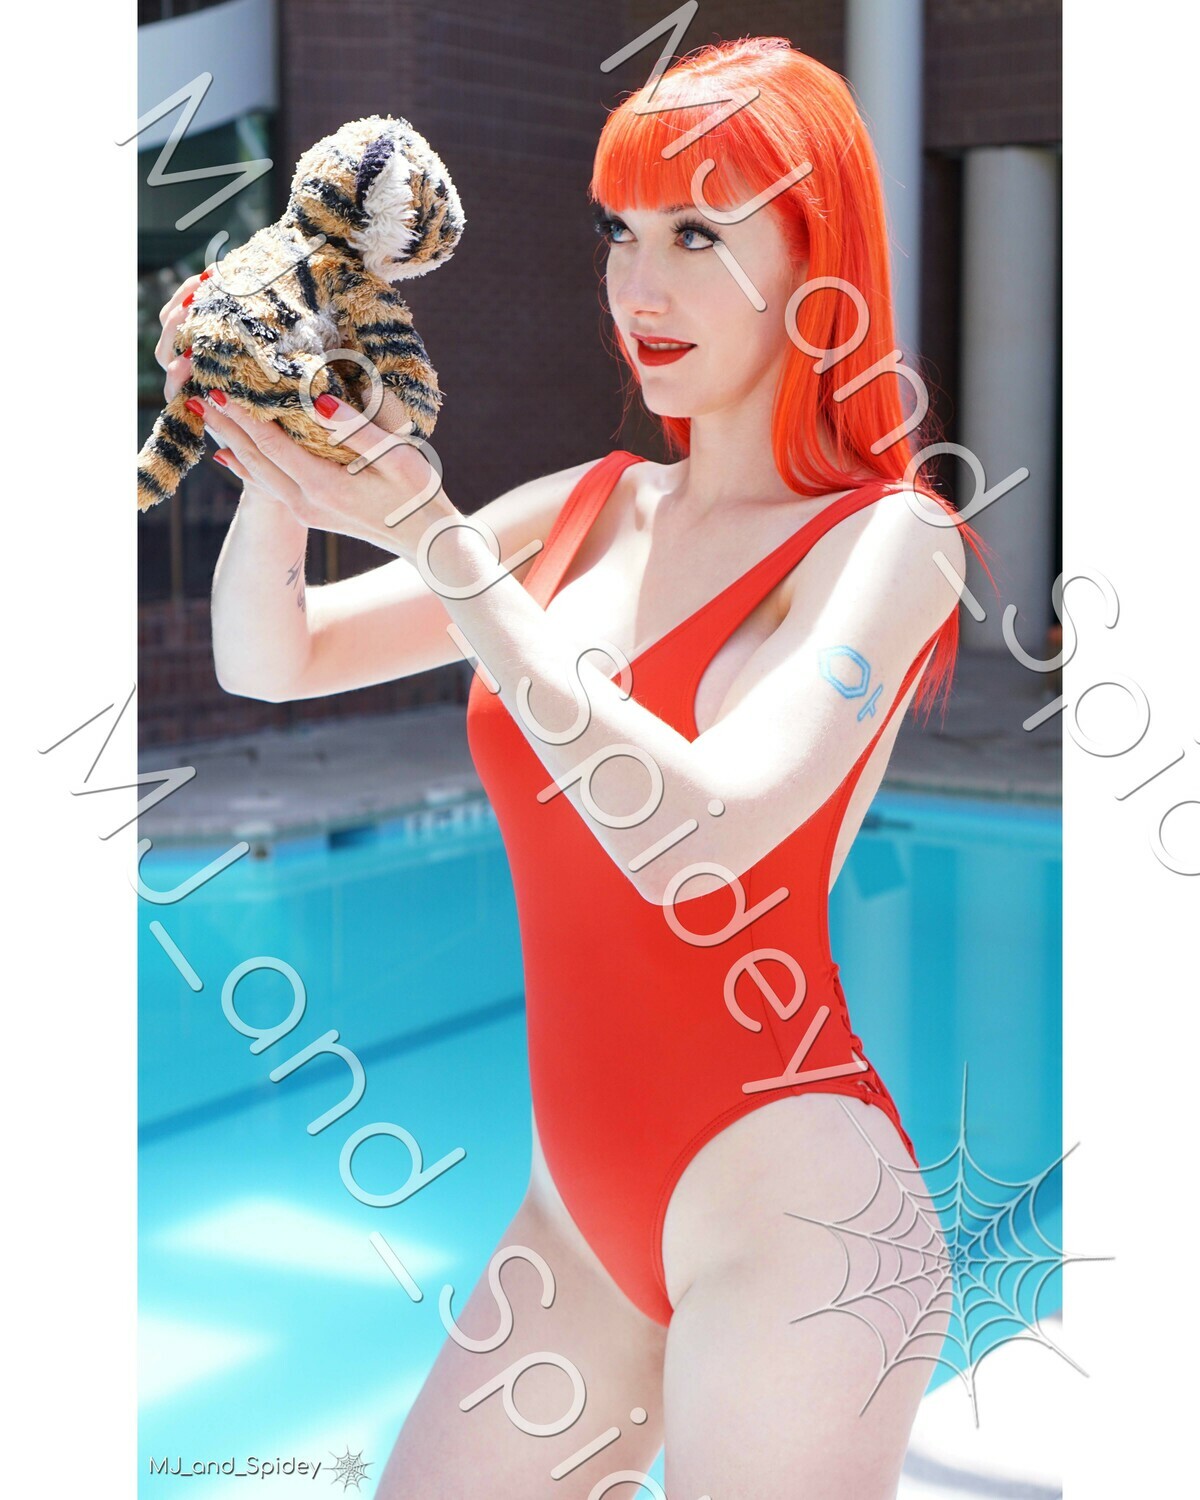 Marvel - Spider-Man - Mary Jane Watson - Swimsuit No. 3 - 8x10 Cosplay Print (@MJ_and_Spidey, MJ and Spidey, Comics)